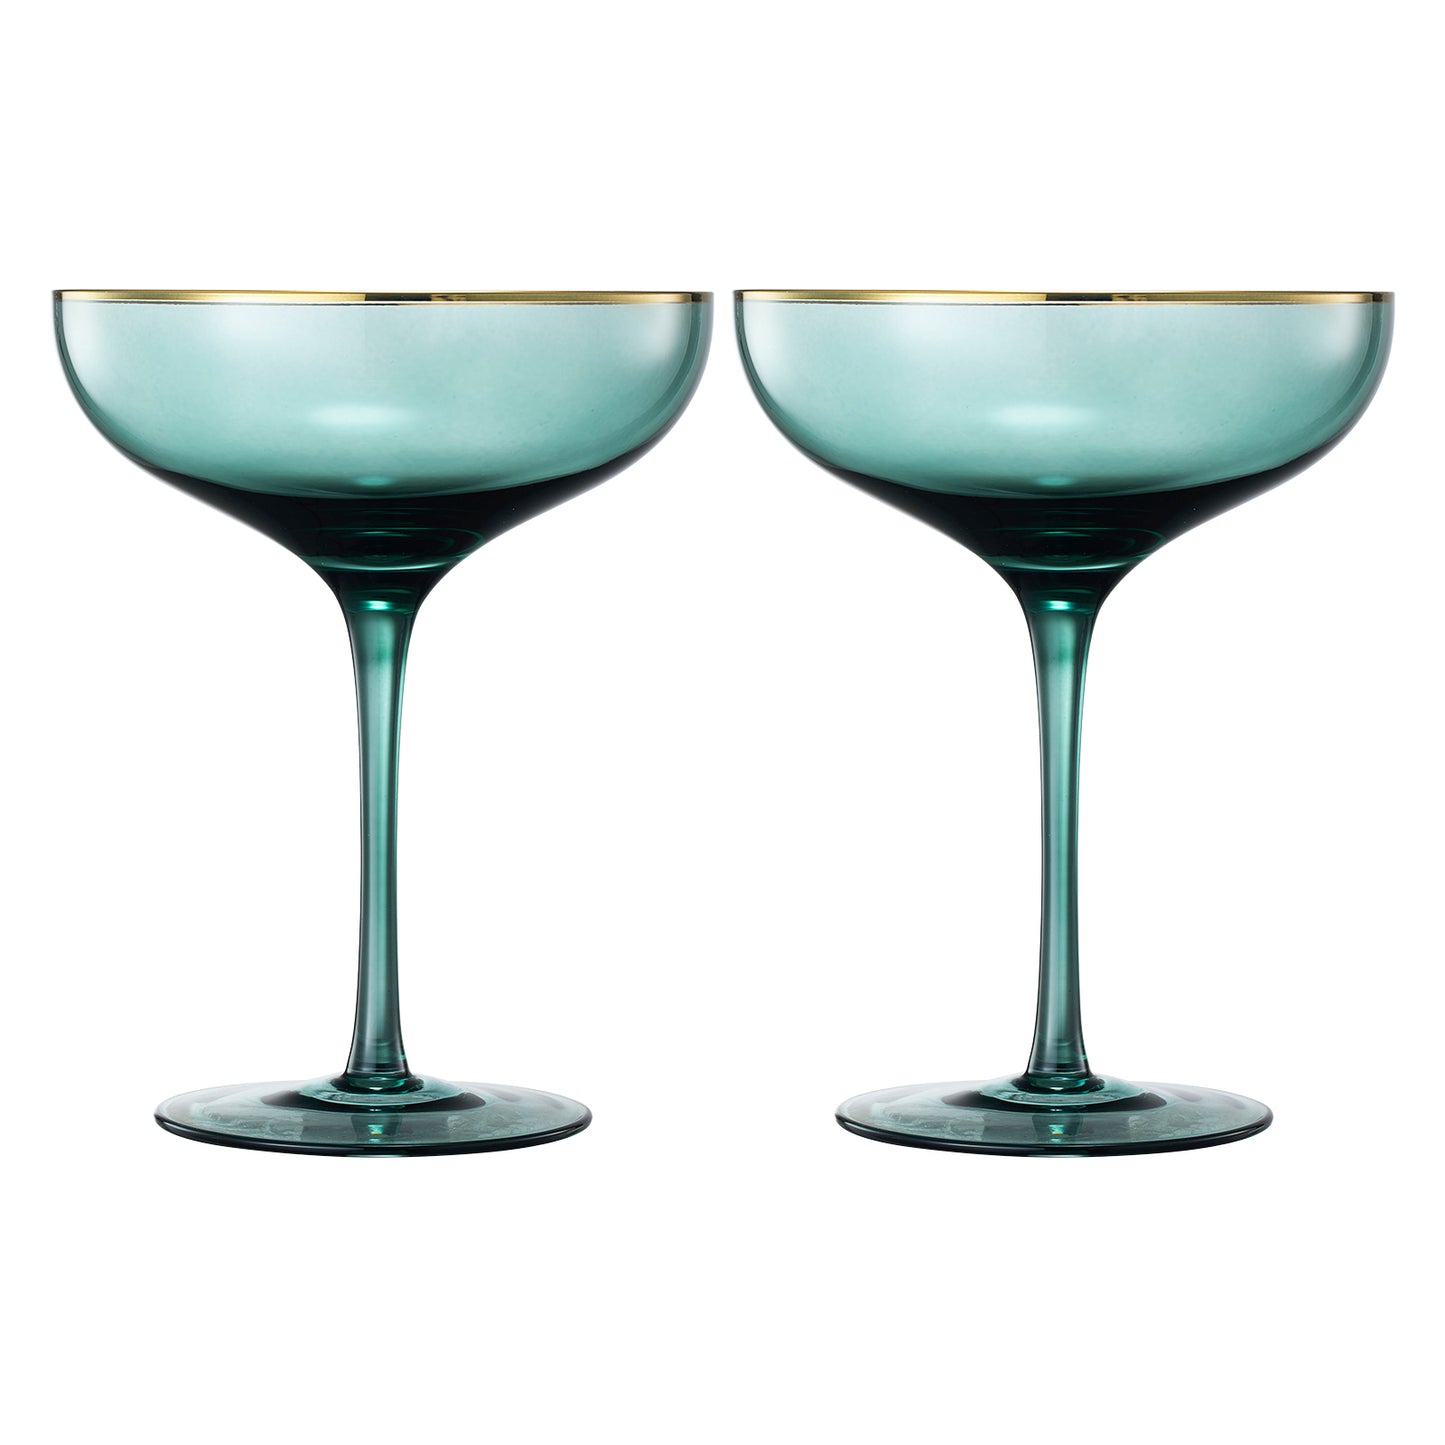 Palazzo Coupe Cocktail Glassware, Set of 2, Green